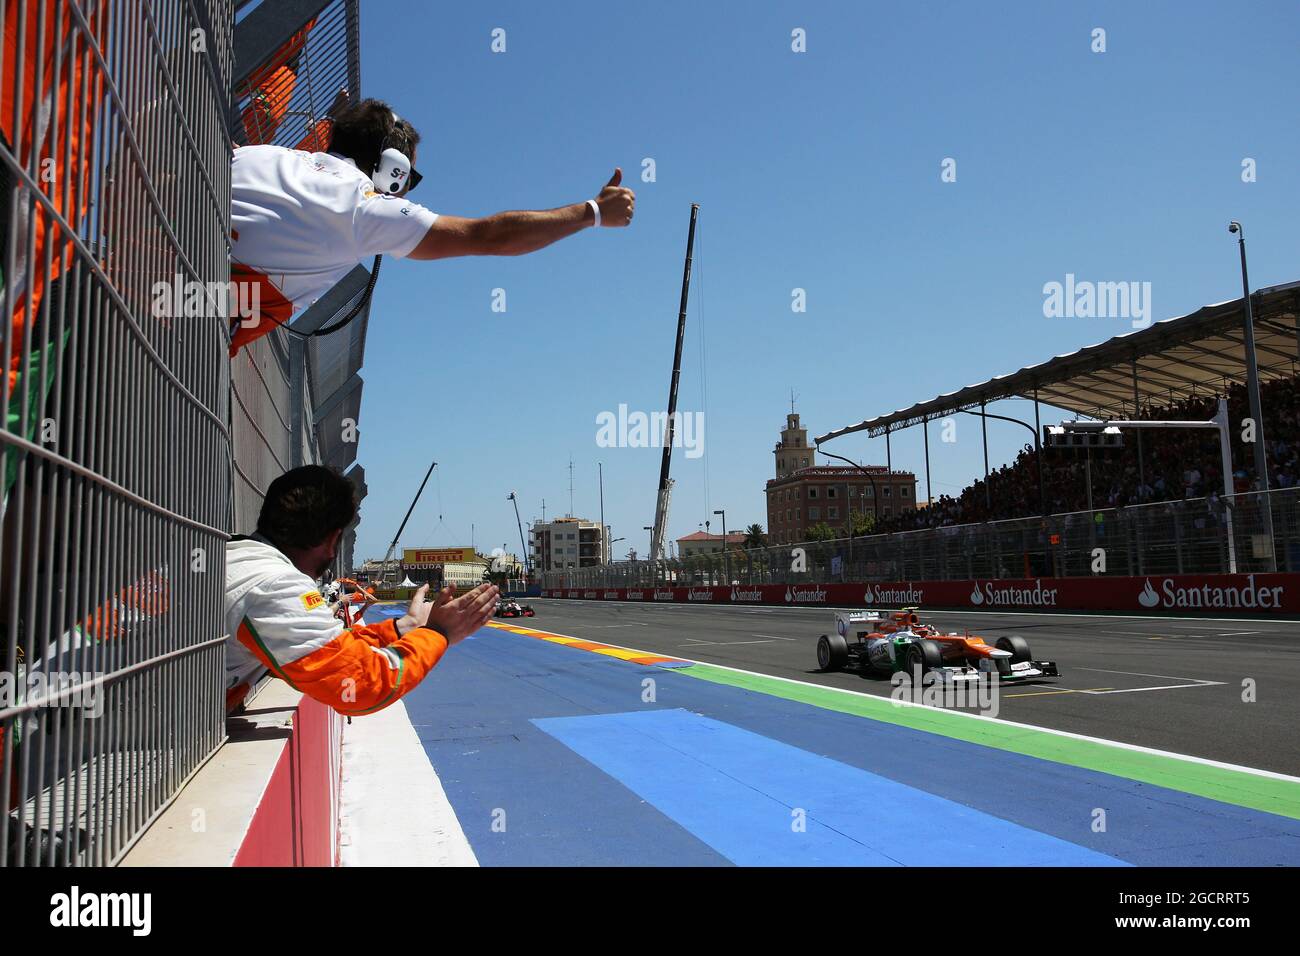 Nico Hulkenberg (GER) Sahara Force India F1 VJM05 and his team celebrate at the end of the race. European Grand Prix, Sunday 24th June 2012. Valencia, Spain. Stock Photo